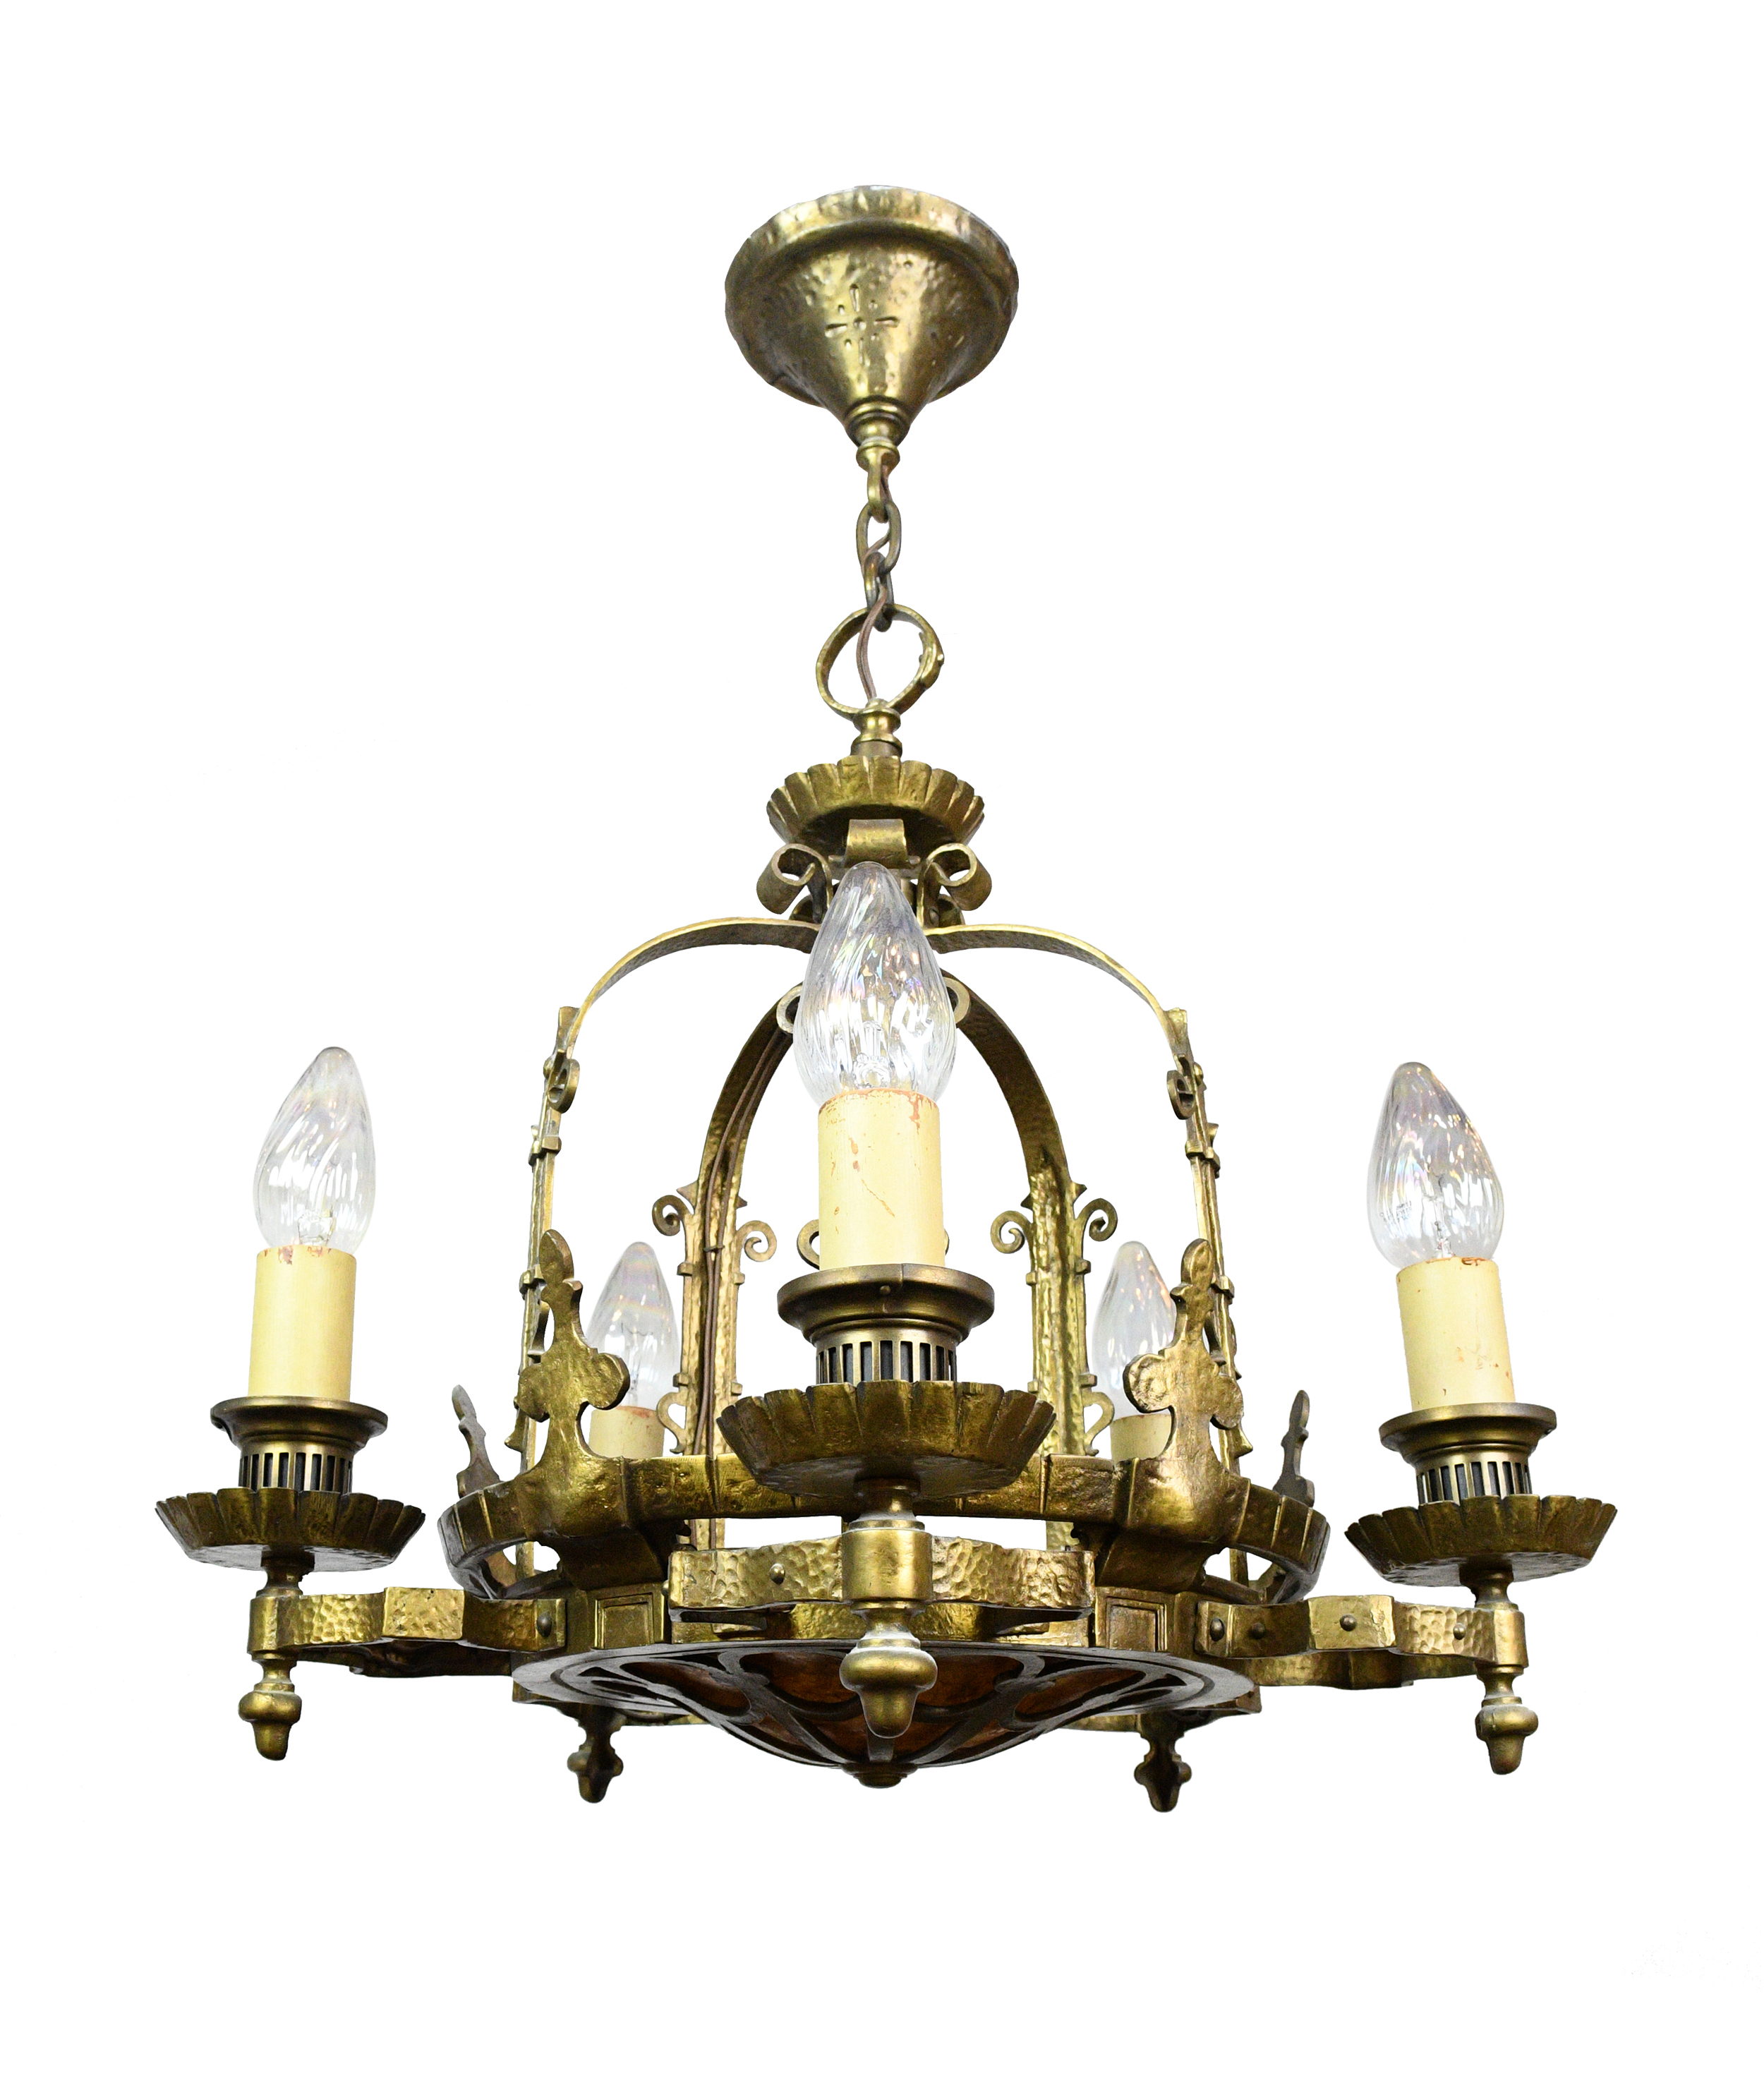 5 light gothic revival chandelier with mica bowl